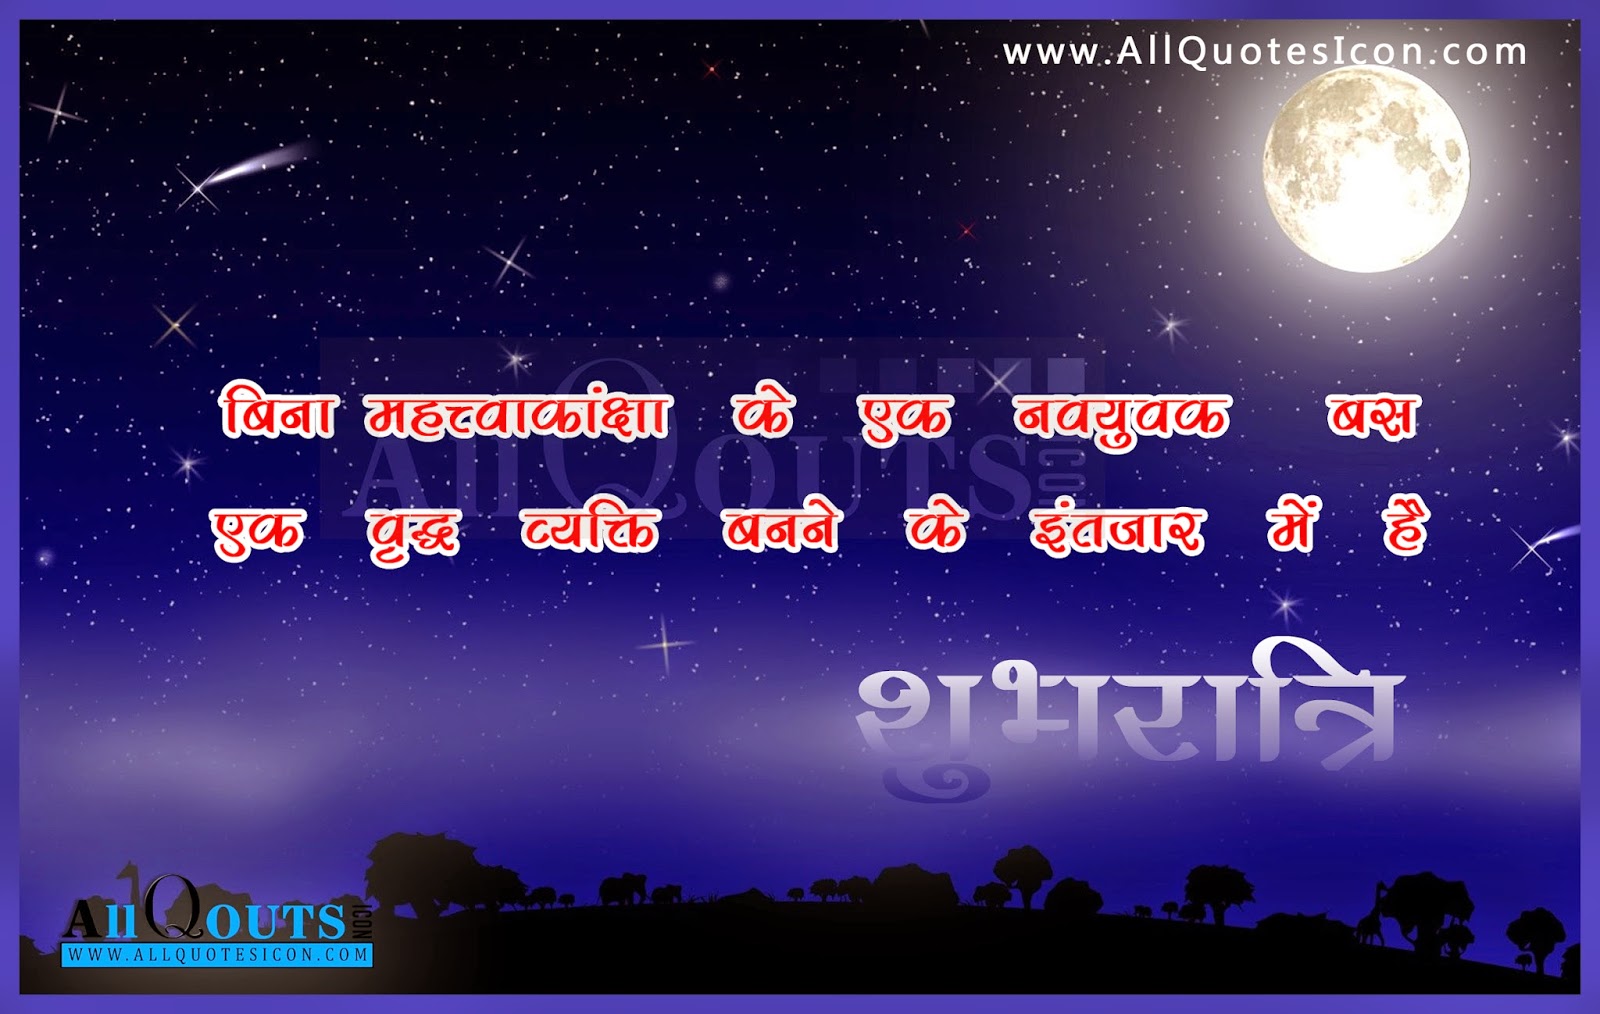 Good Night Hindi quotes images pictures wallpapers photos